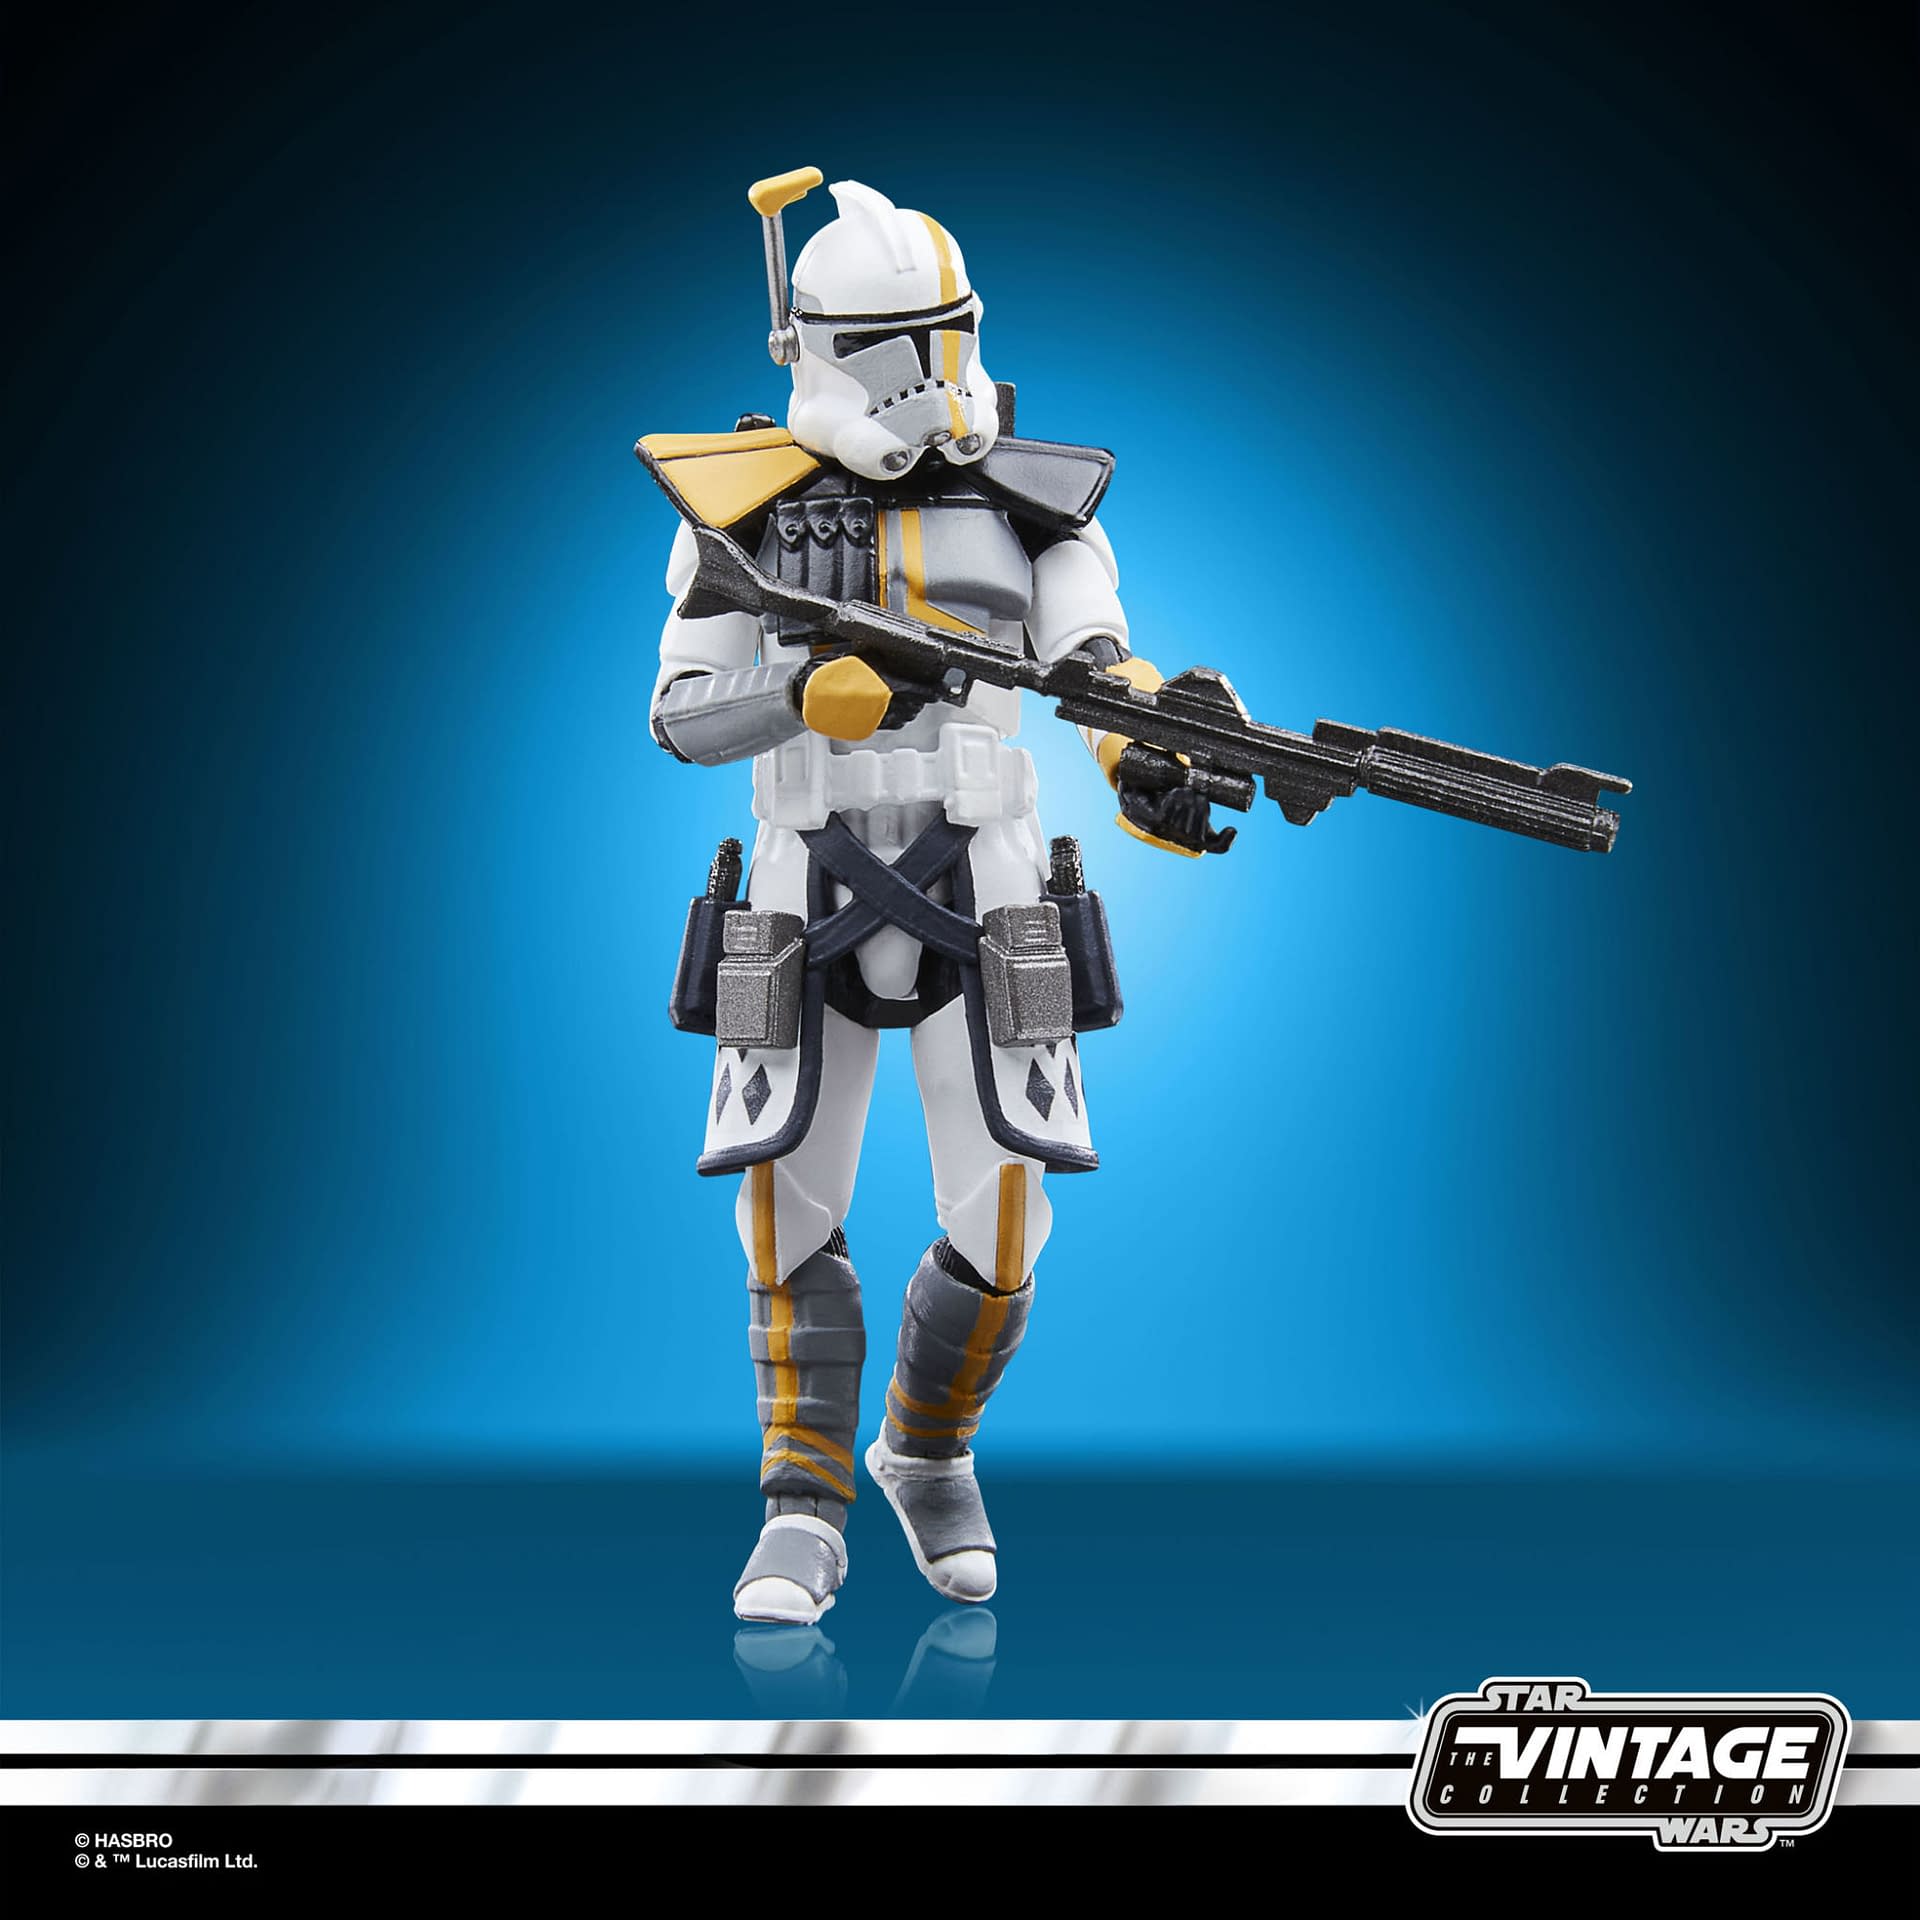 Star Wars Arc Commander Blitz Fights for the Republic with Hasbro 